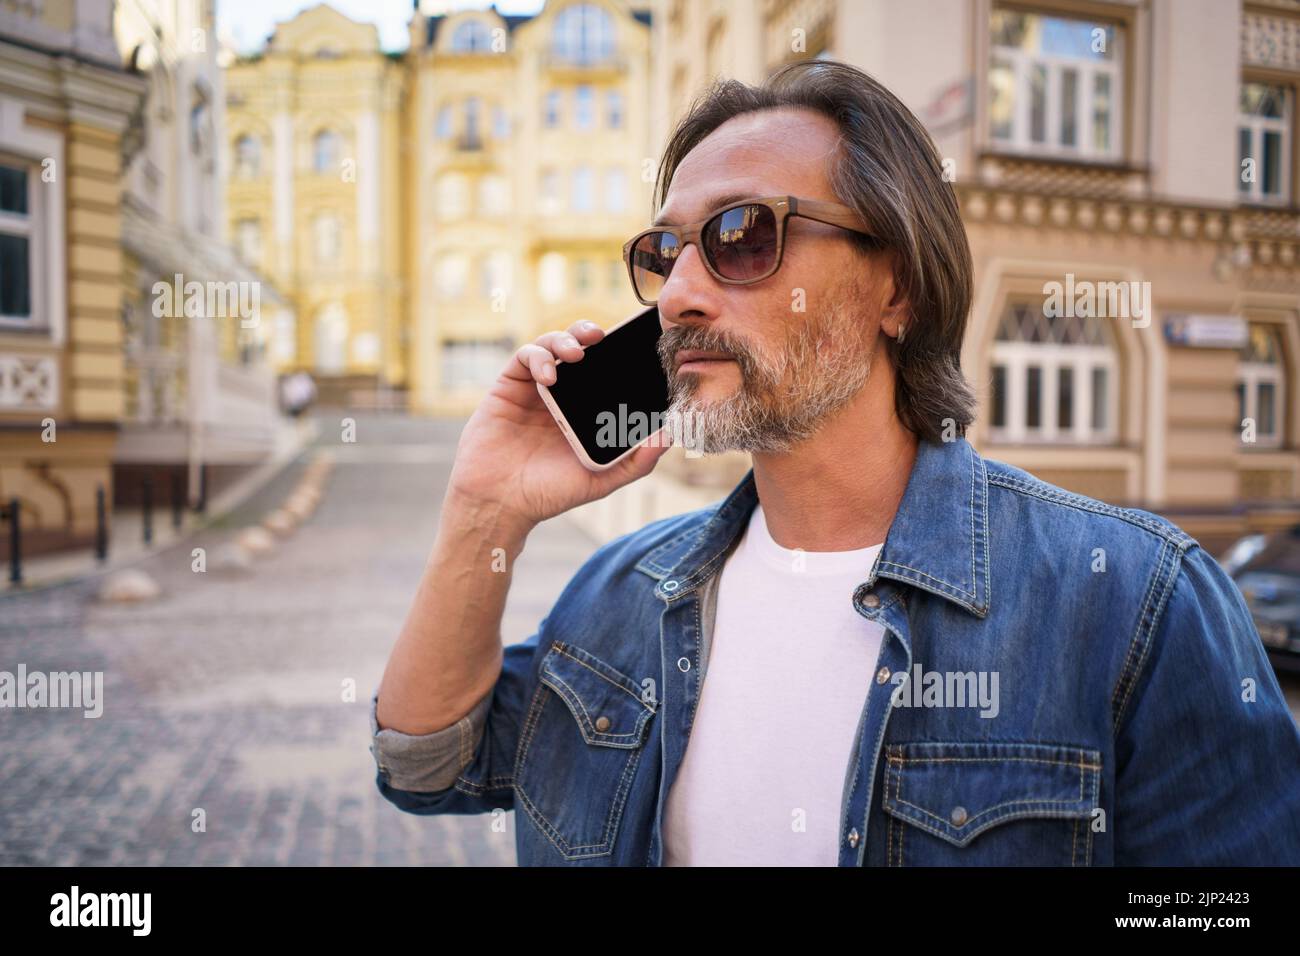 Middle aged man with grey bearded talking on the phone standing outdoors in old city background wearing denim jeans shirt. Mature business man working on the go. Freelancer traveling man.  Stock Photo